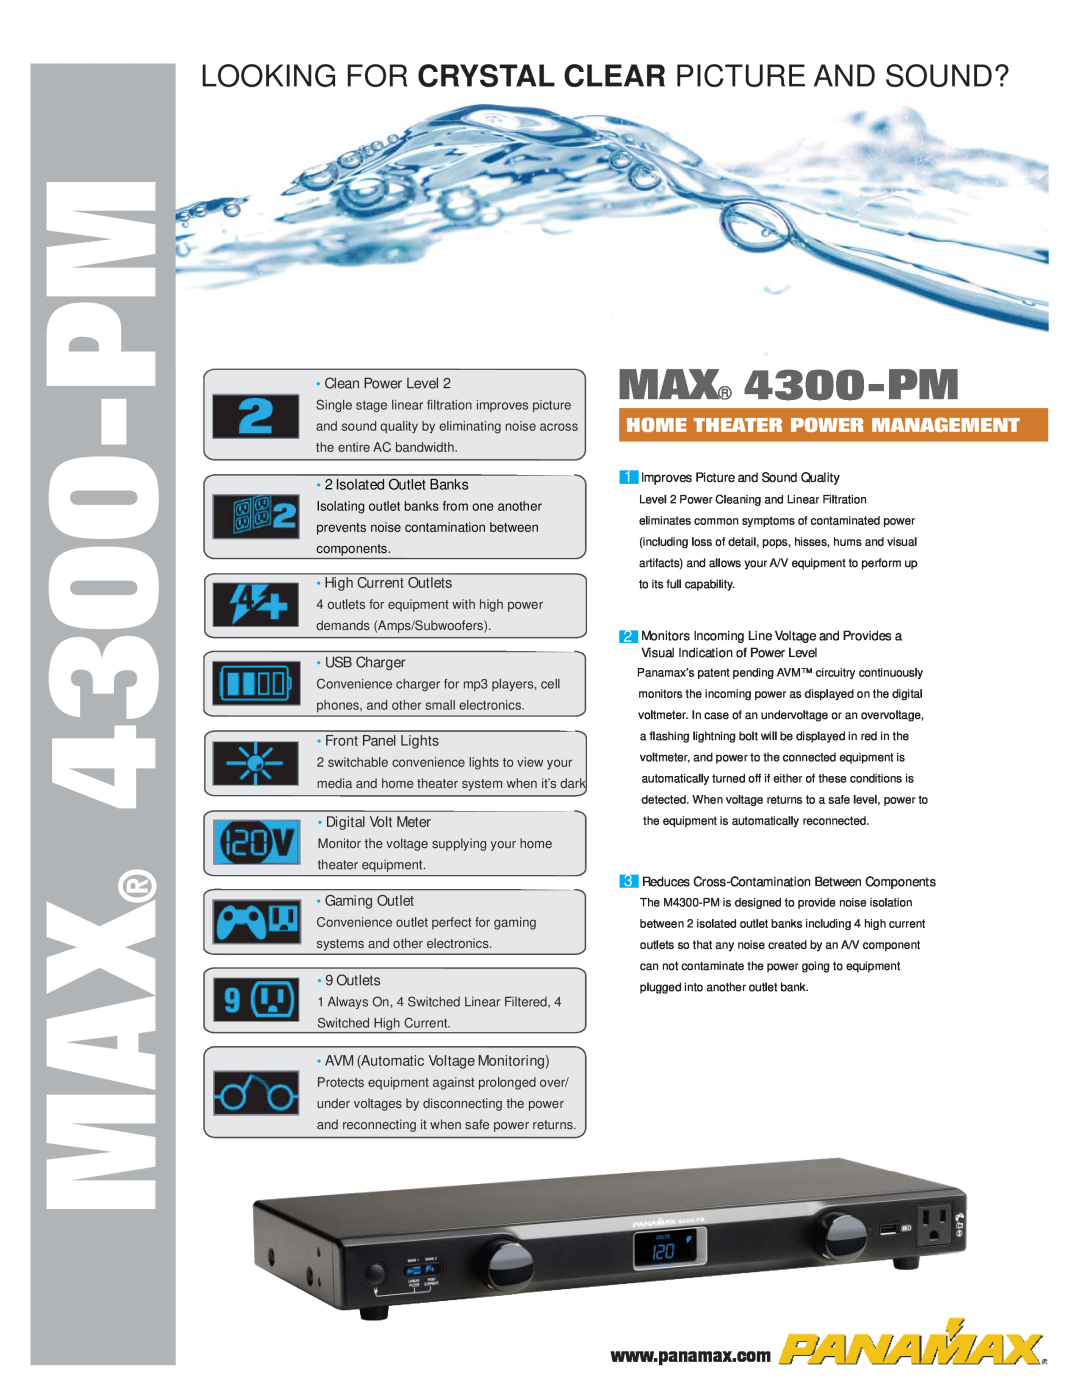 Panamax MAX(R) 4300-PM manual MAX 4300-PM, Looking For Crystal Clear Picture And Sound?, Home Theater Power Management 